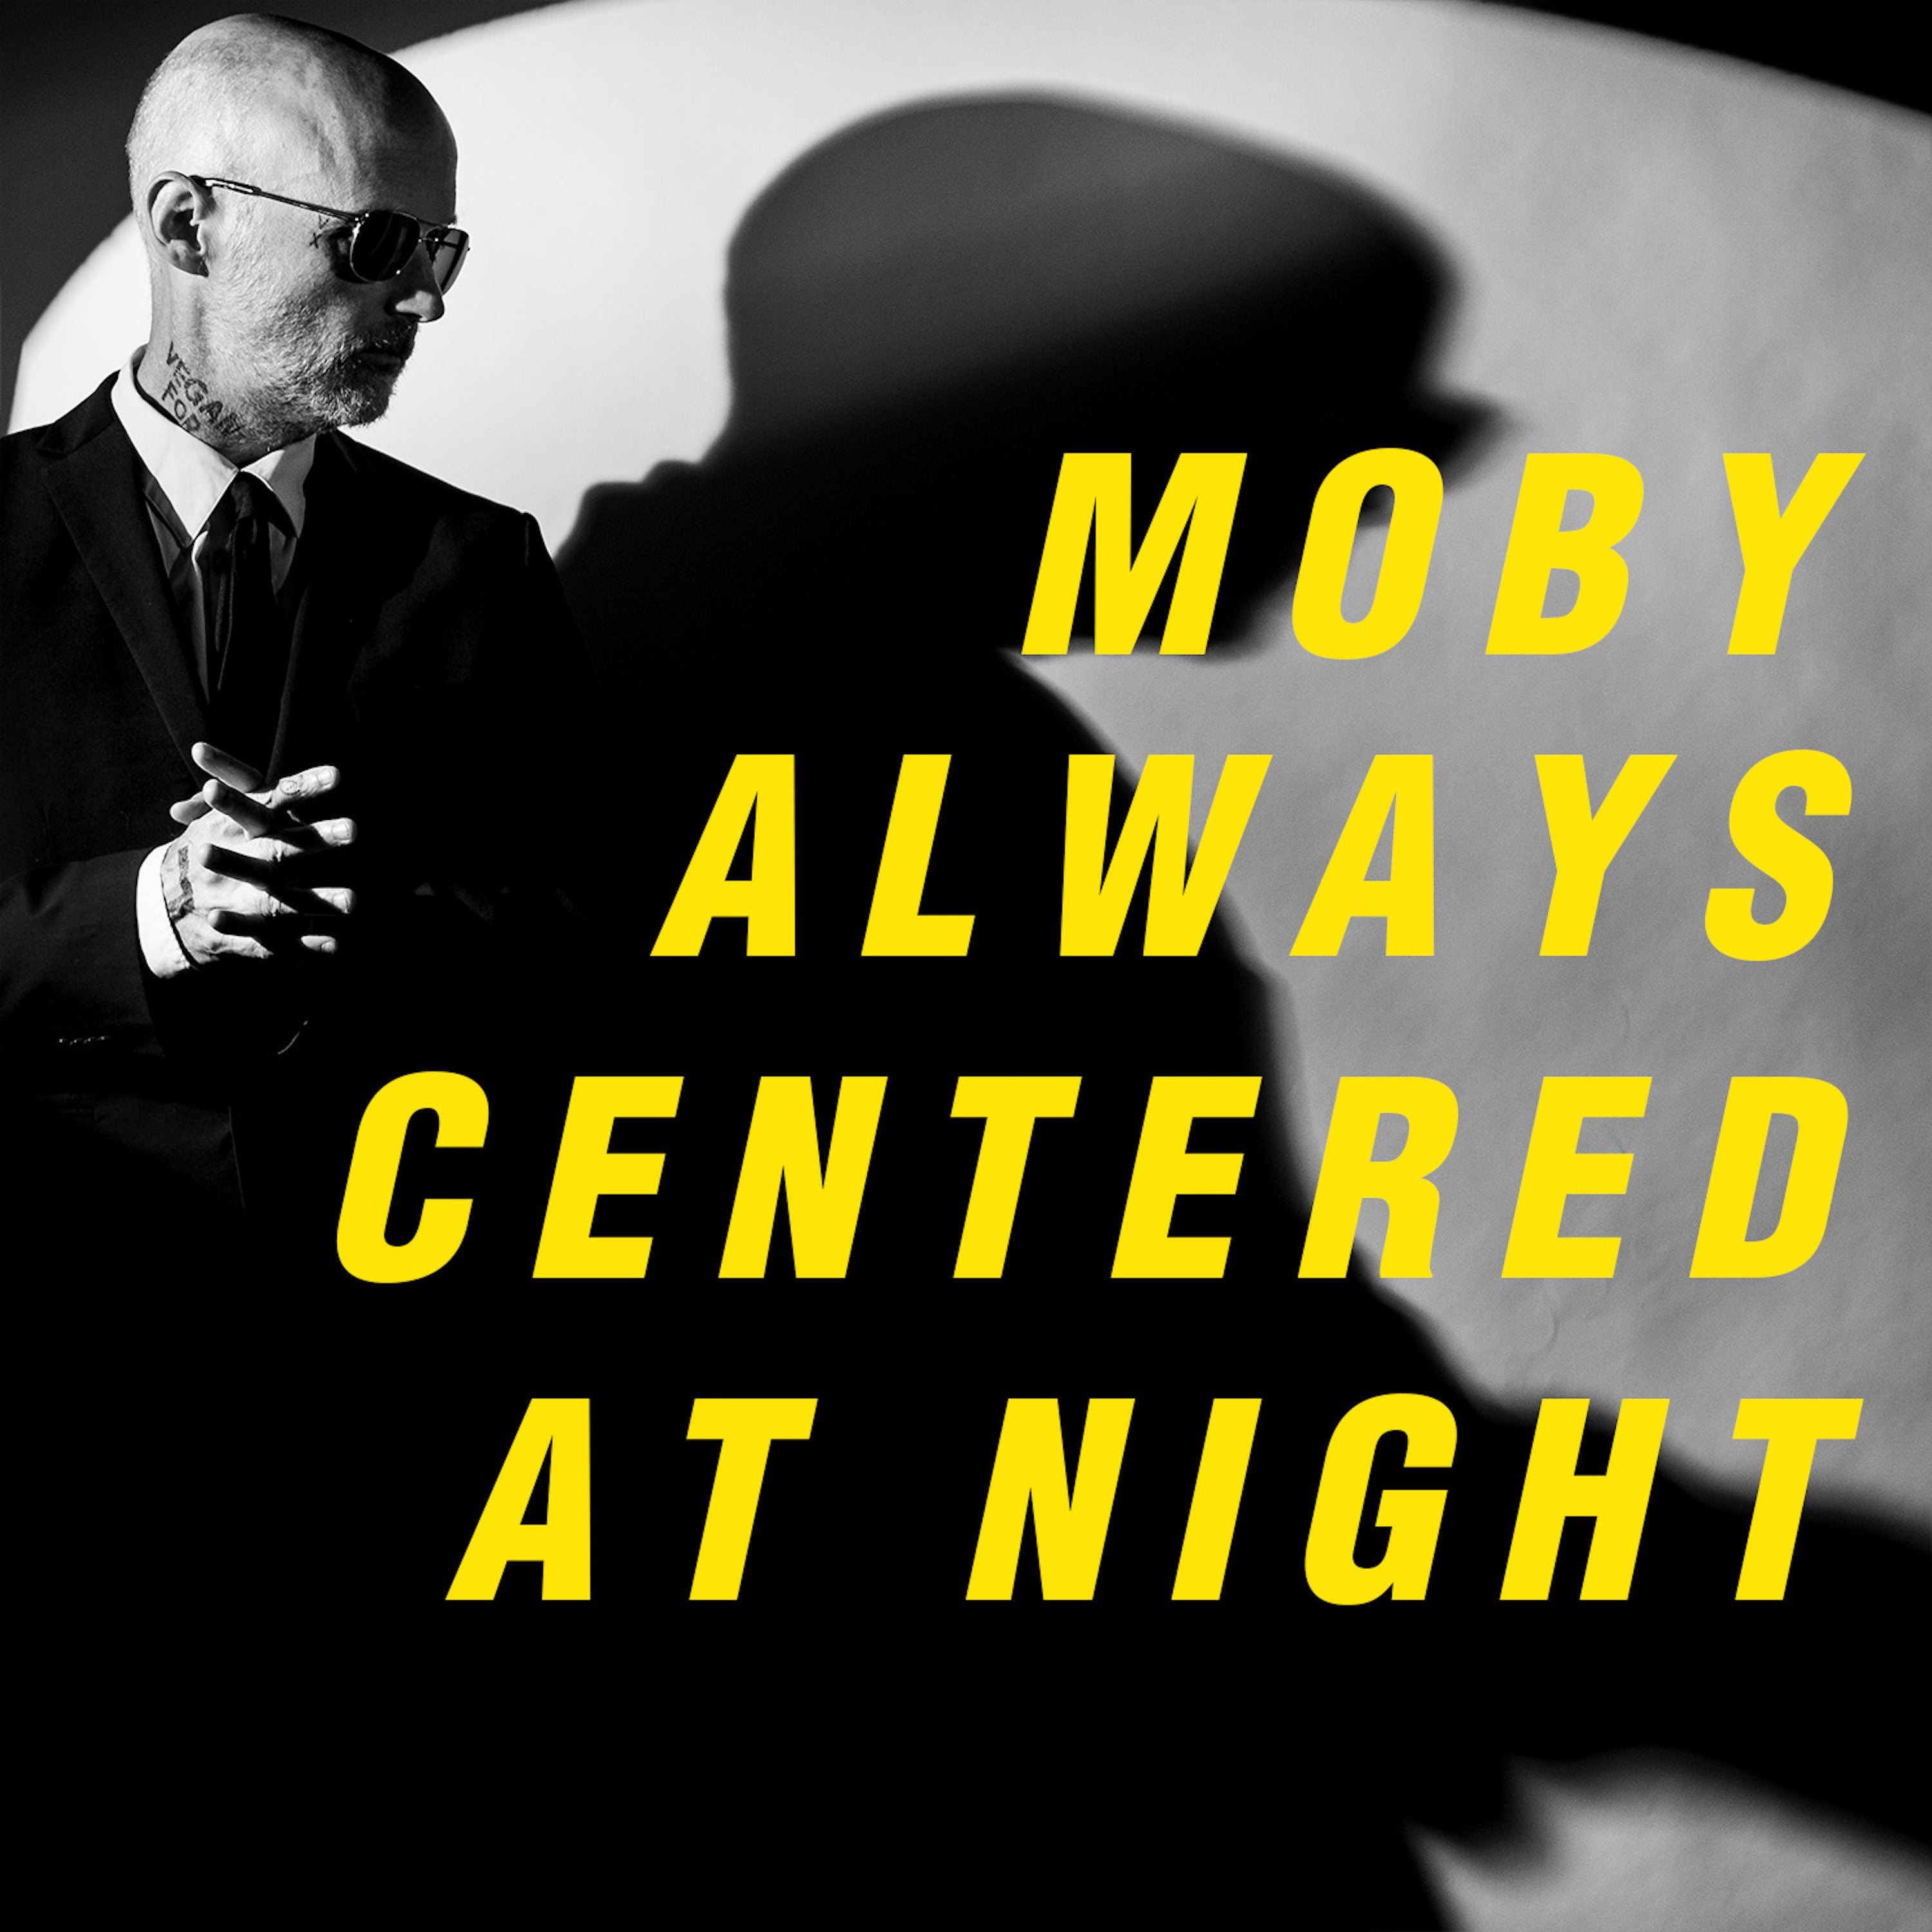 MOBY - Always Centered At Night: Vinyl 2LP